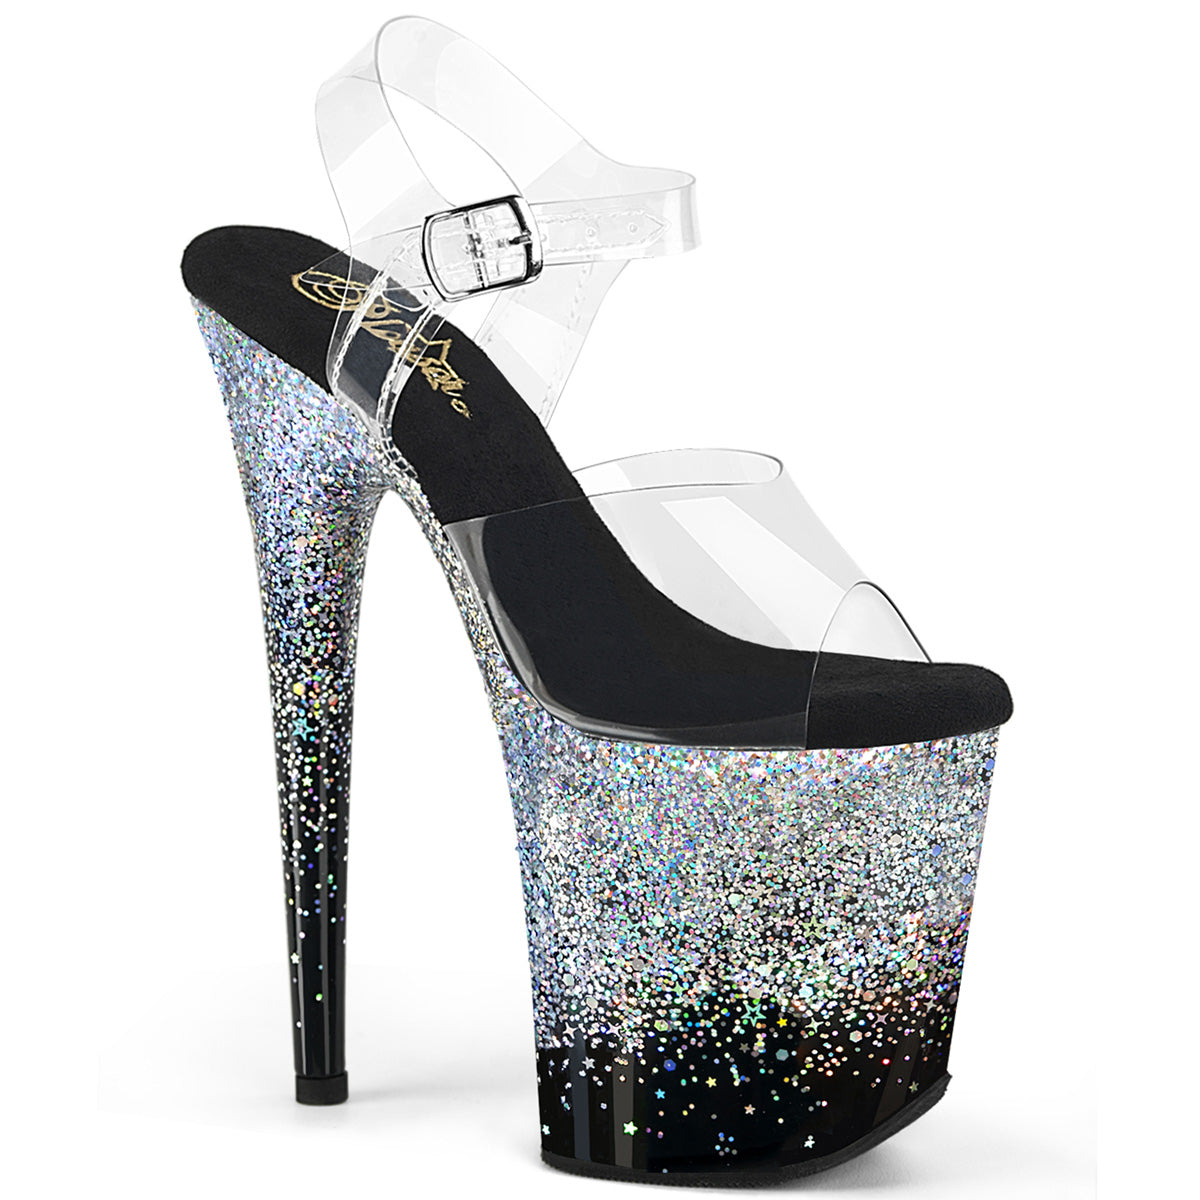 FLAMINGO-808SS Pleaser Clear/Black-Silver Multi Glitter Platform Shoes [Exotic Dancing Shoes]